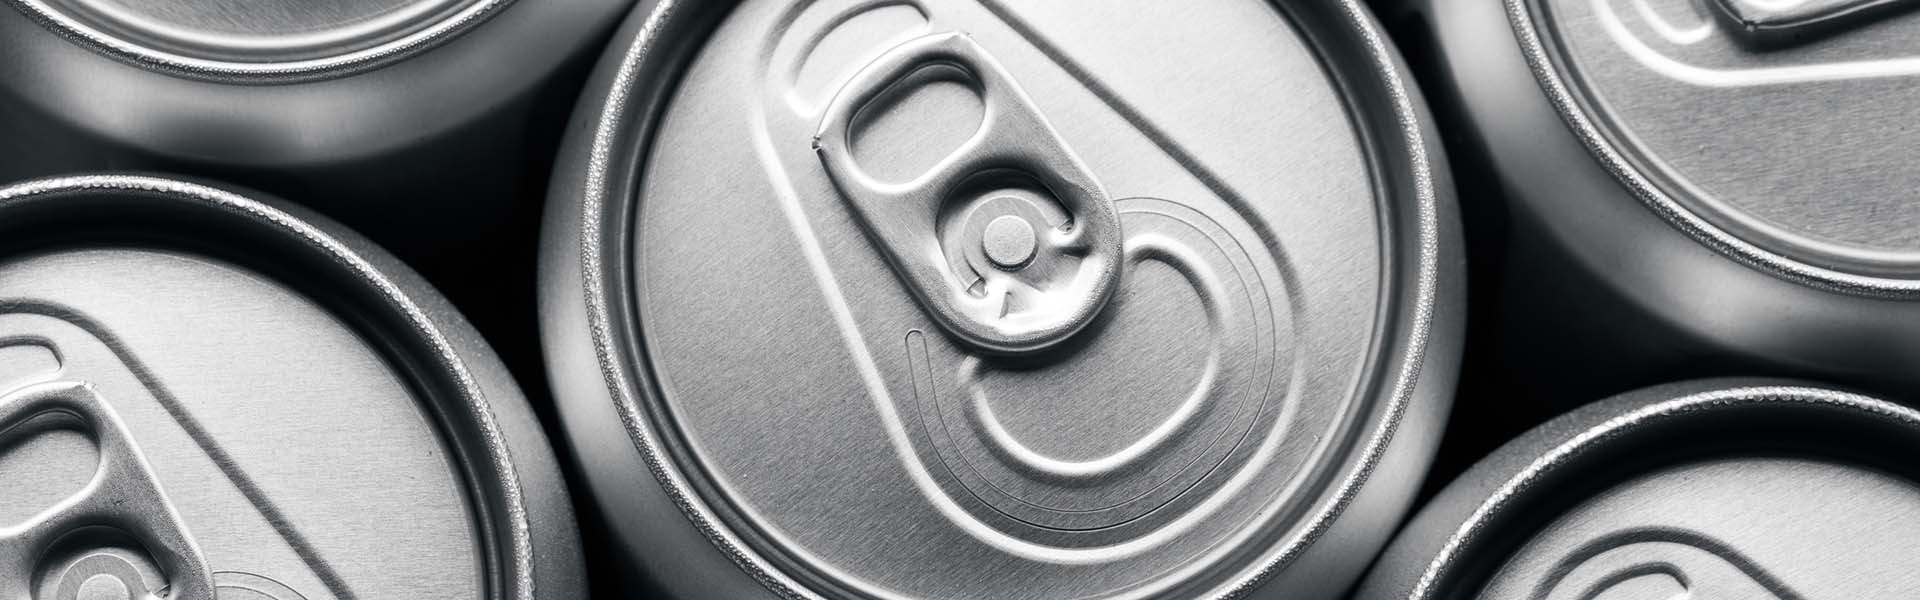 An image of some cans